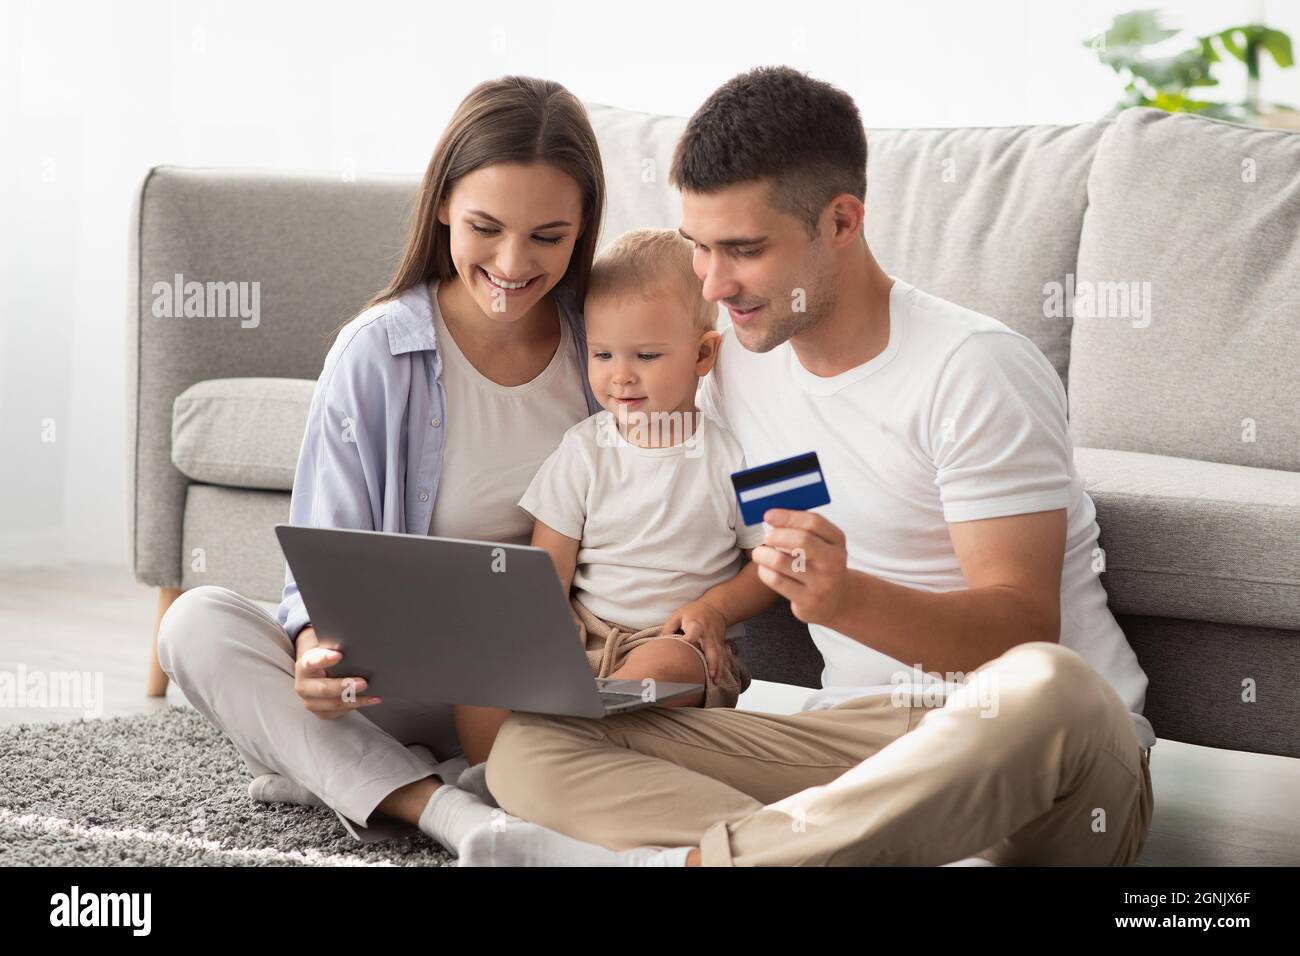 Parents And Little Baby With Laptop And Credit Card Making Online Shopping Stock Photo